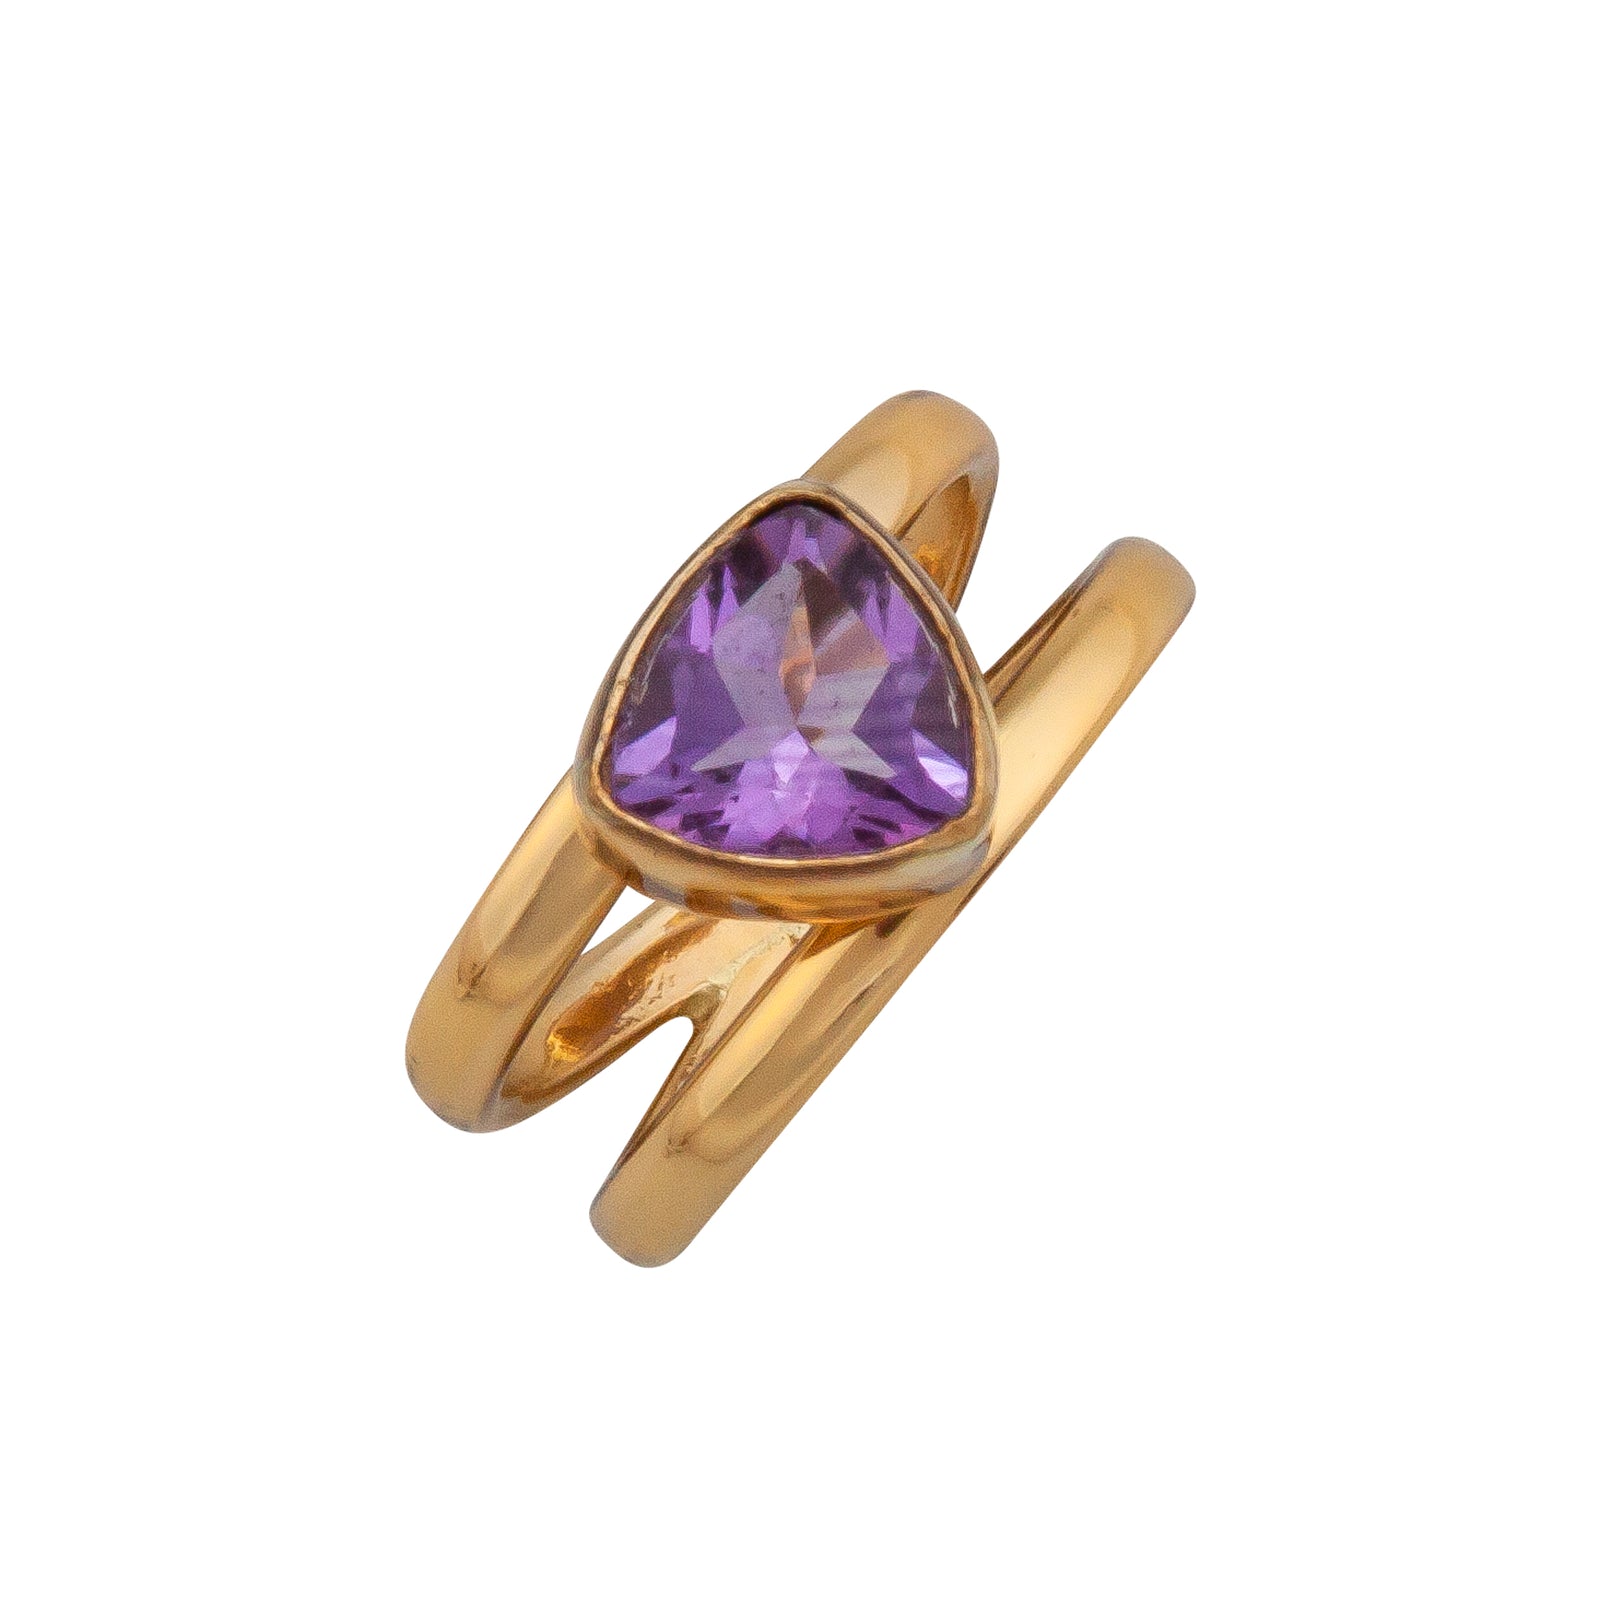 Charles Albert Jewelry - Alchemia Amethyst Trillion Double Band Cuff Ring - Front View